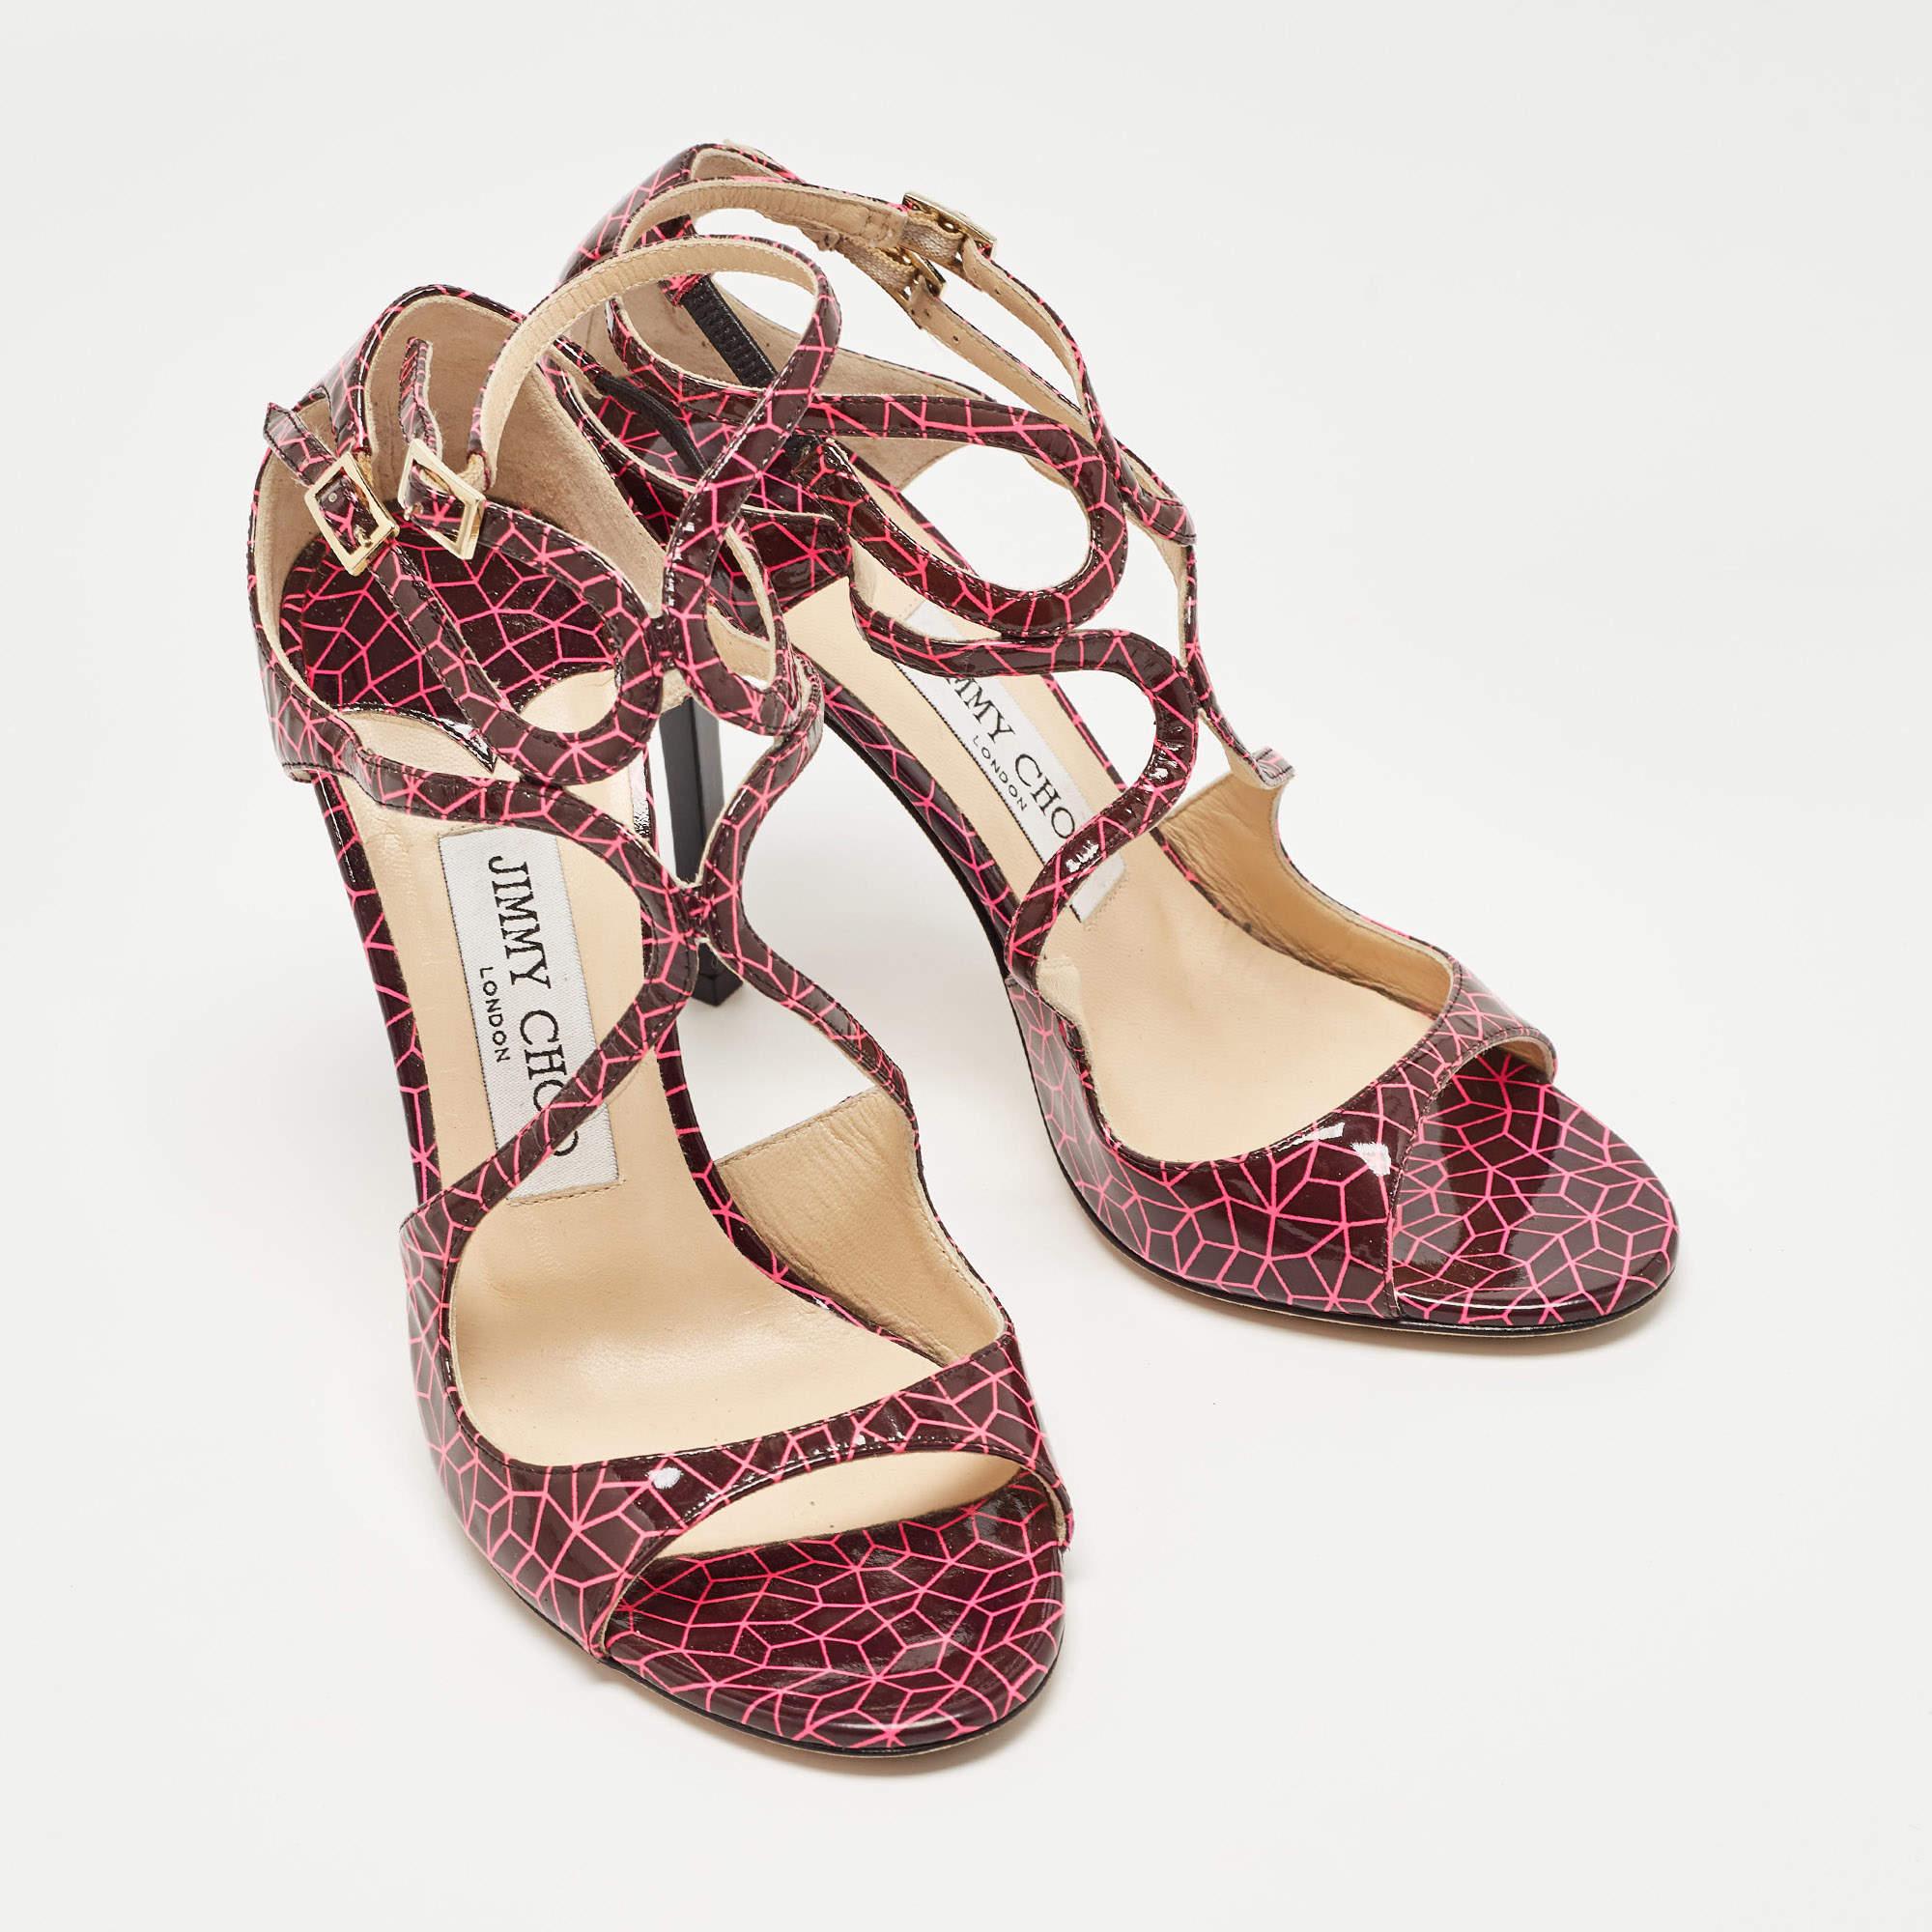 Jimmy Choo Pink/Burgundy Print Patent Leather Lance Sandals Size 37 In Good Condition For Sale In Dubai, Al Qouz 2